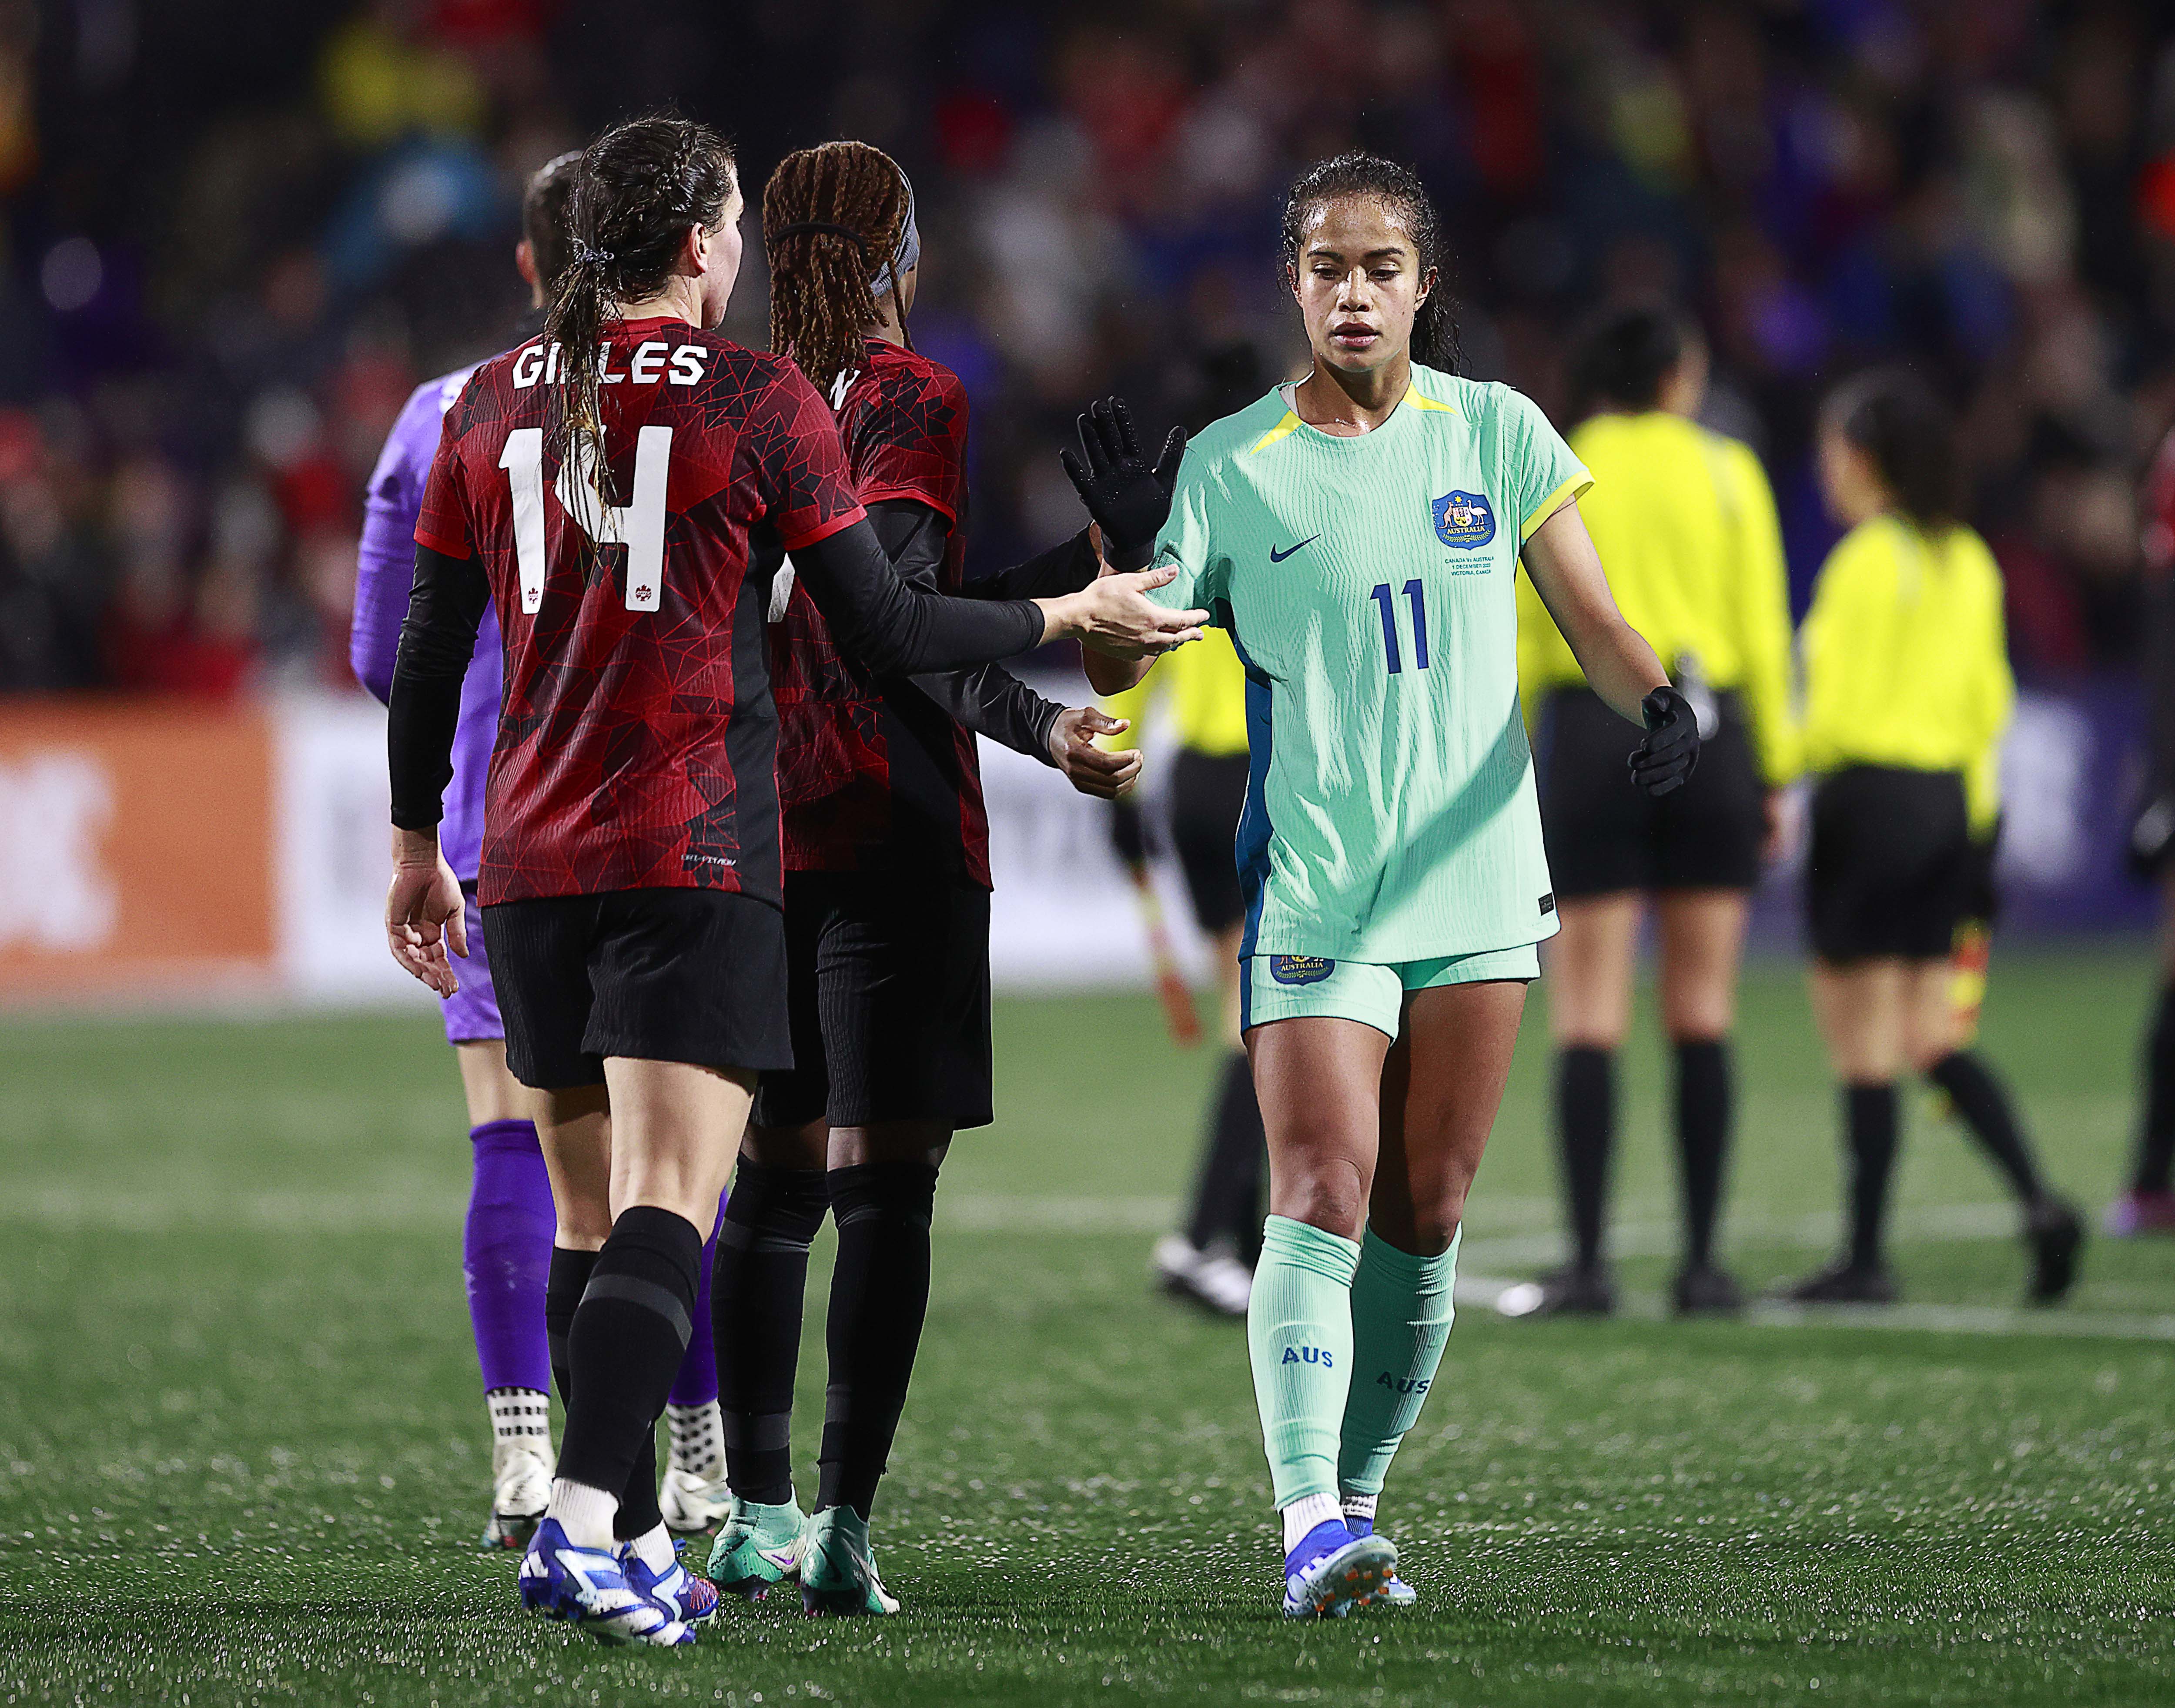 Vanessa Gillies #14 of Canada is congratulated by Mary Fowler #11 of Australia after their friendly match at Starlight Stadium on December 01, 2023 in Langford, British Columbia. Canada won 5-0. (Photo by Jeff Vinnick/Getty Images for Football Australia)